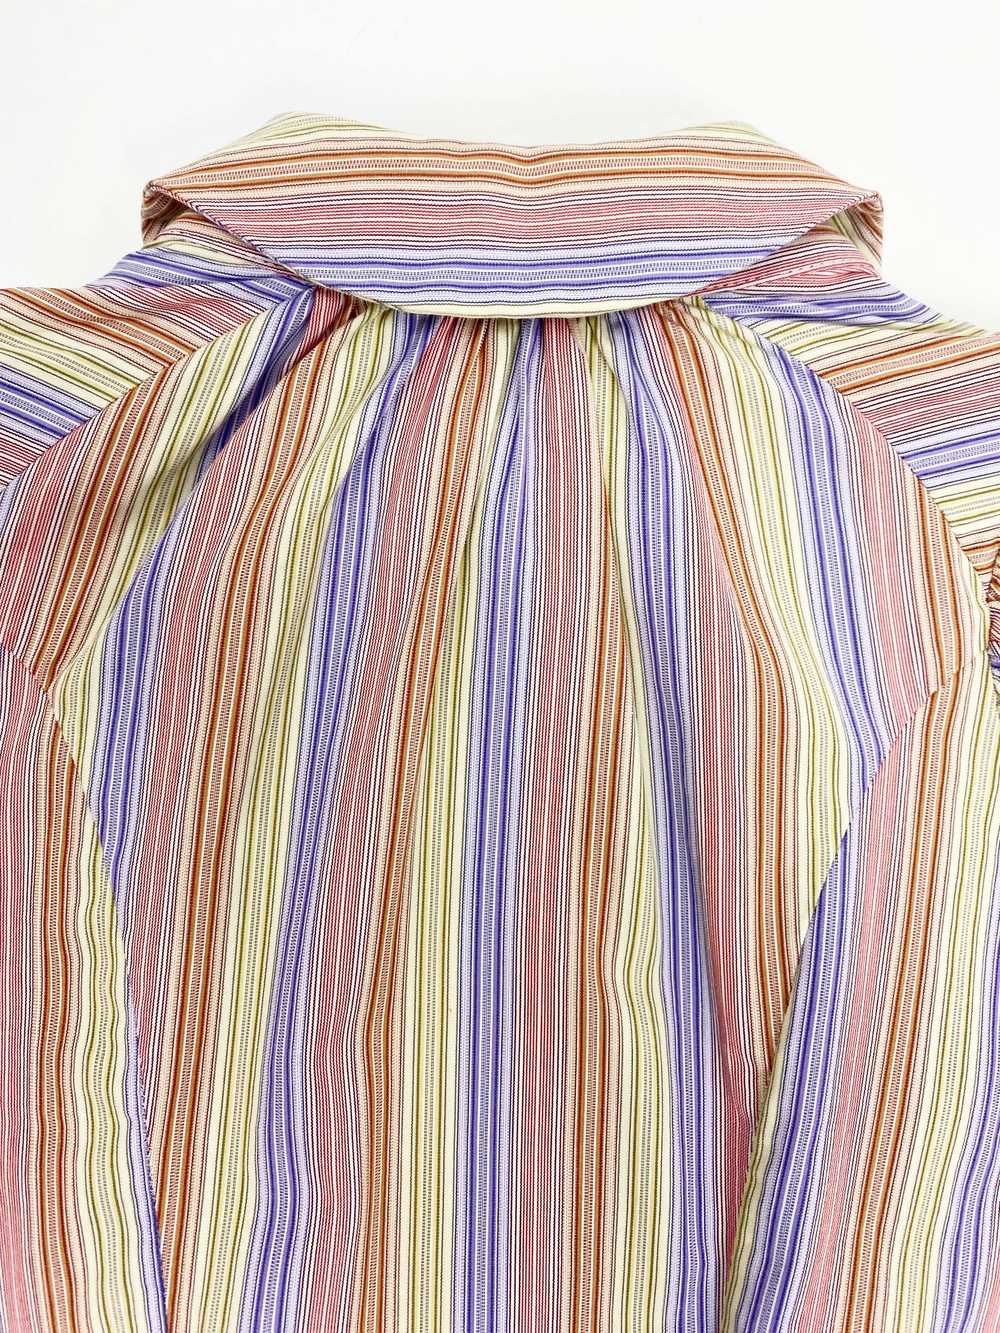 Vivienne Westwood 90s puff sleeve striped shirt - image 7